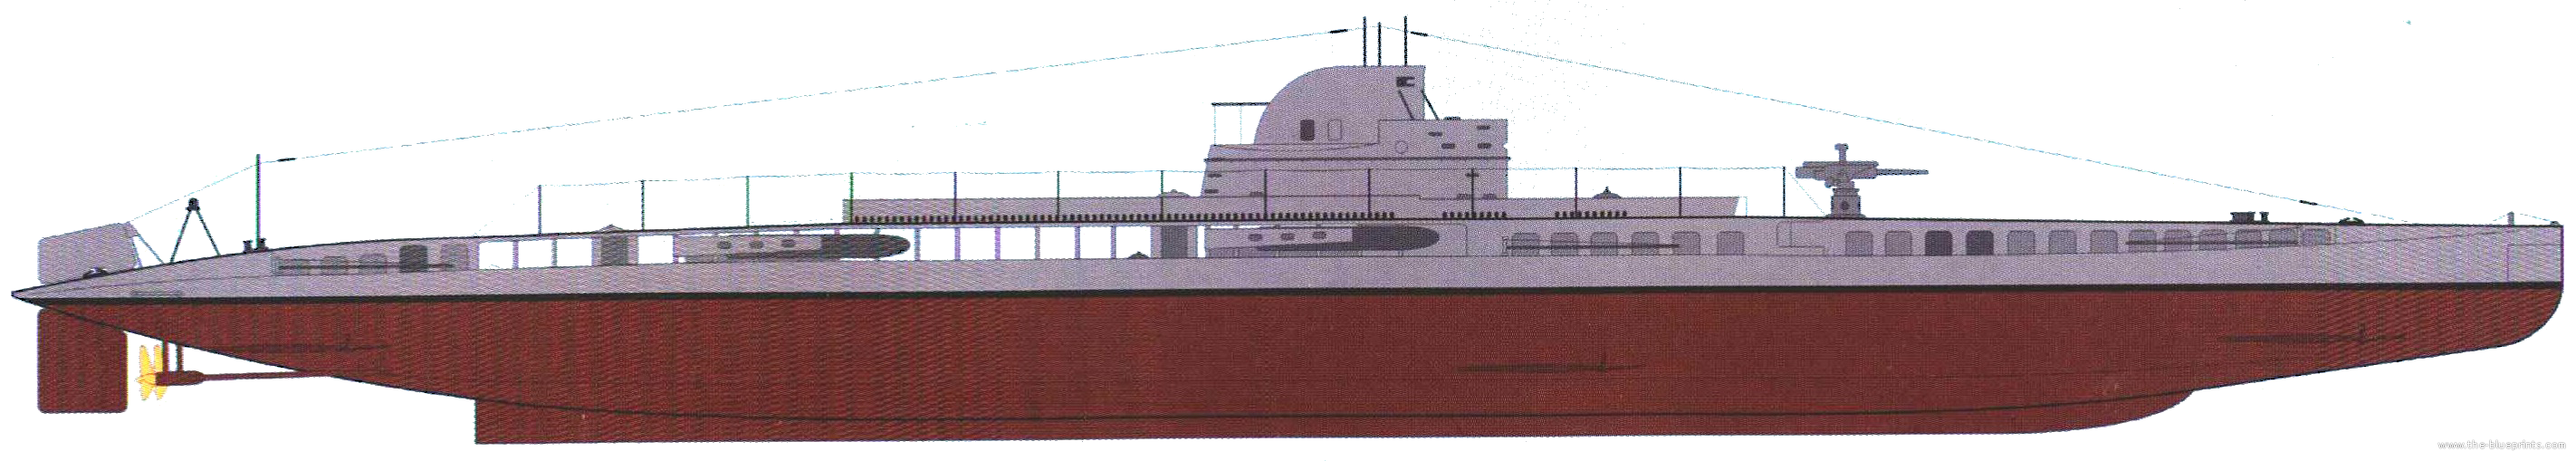 sms-u-14-1916-ex-nmf-curie-submarine.png